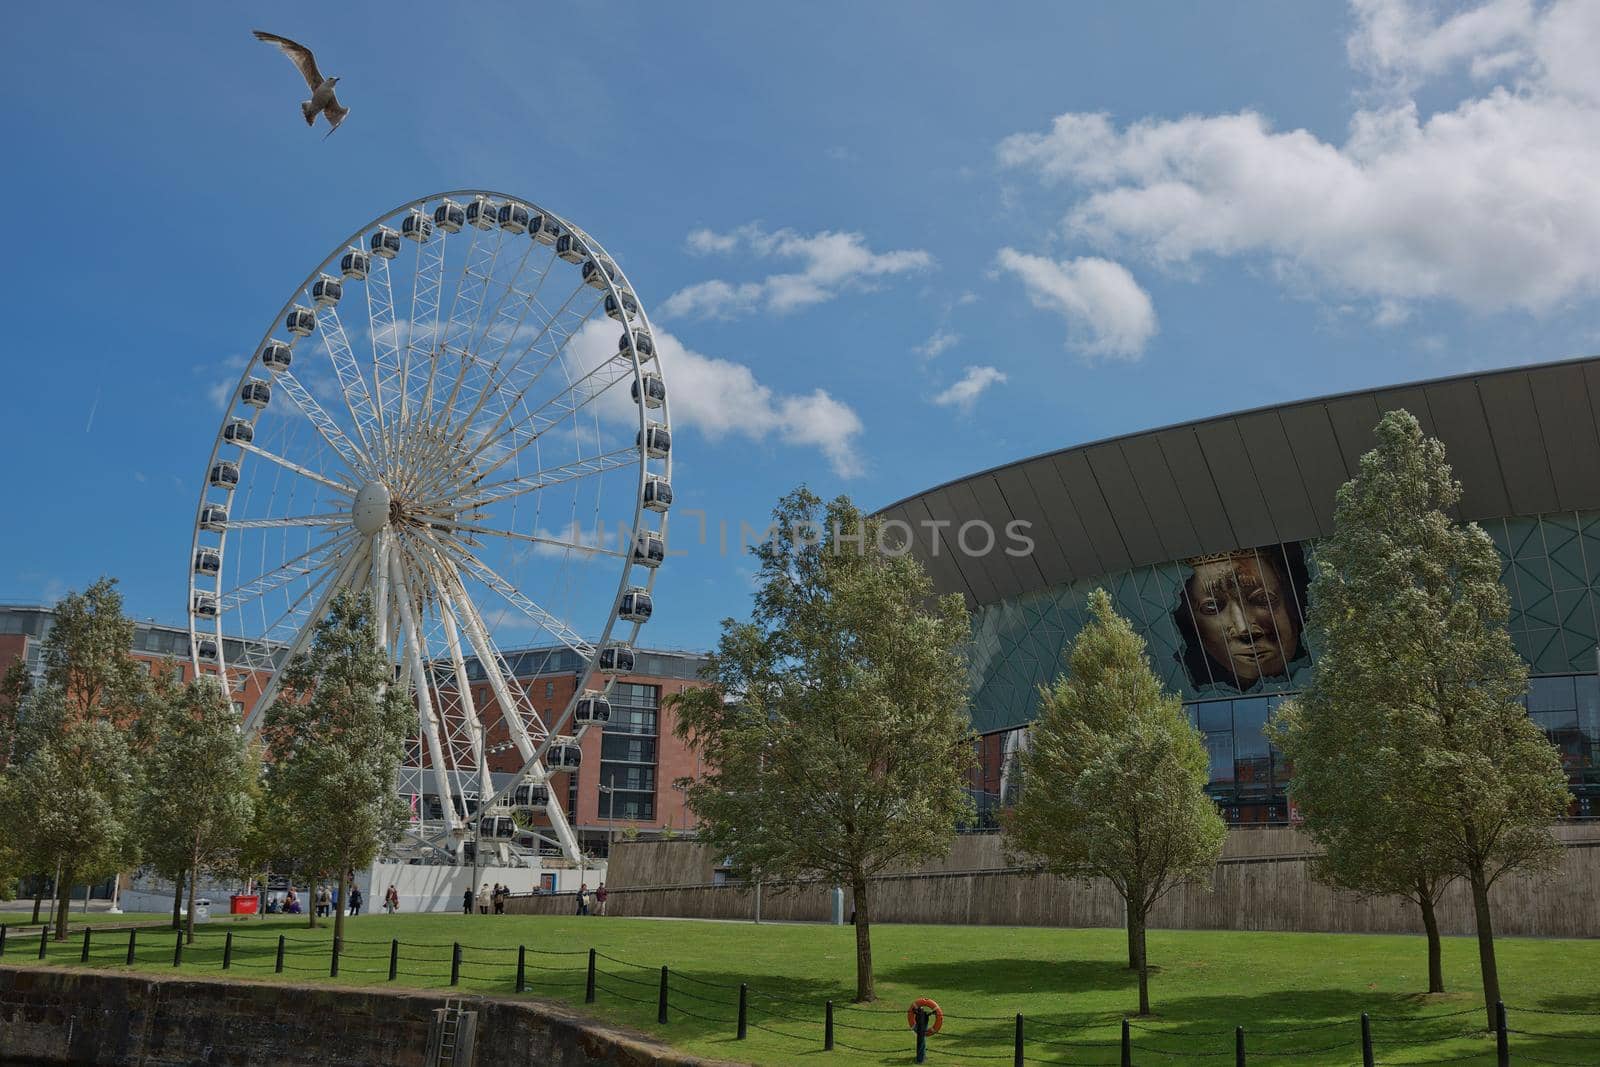 View of the ECHO convention center and an adjacent ferris wheel in Liverpool, England by wondry